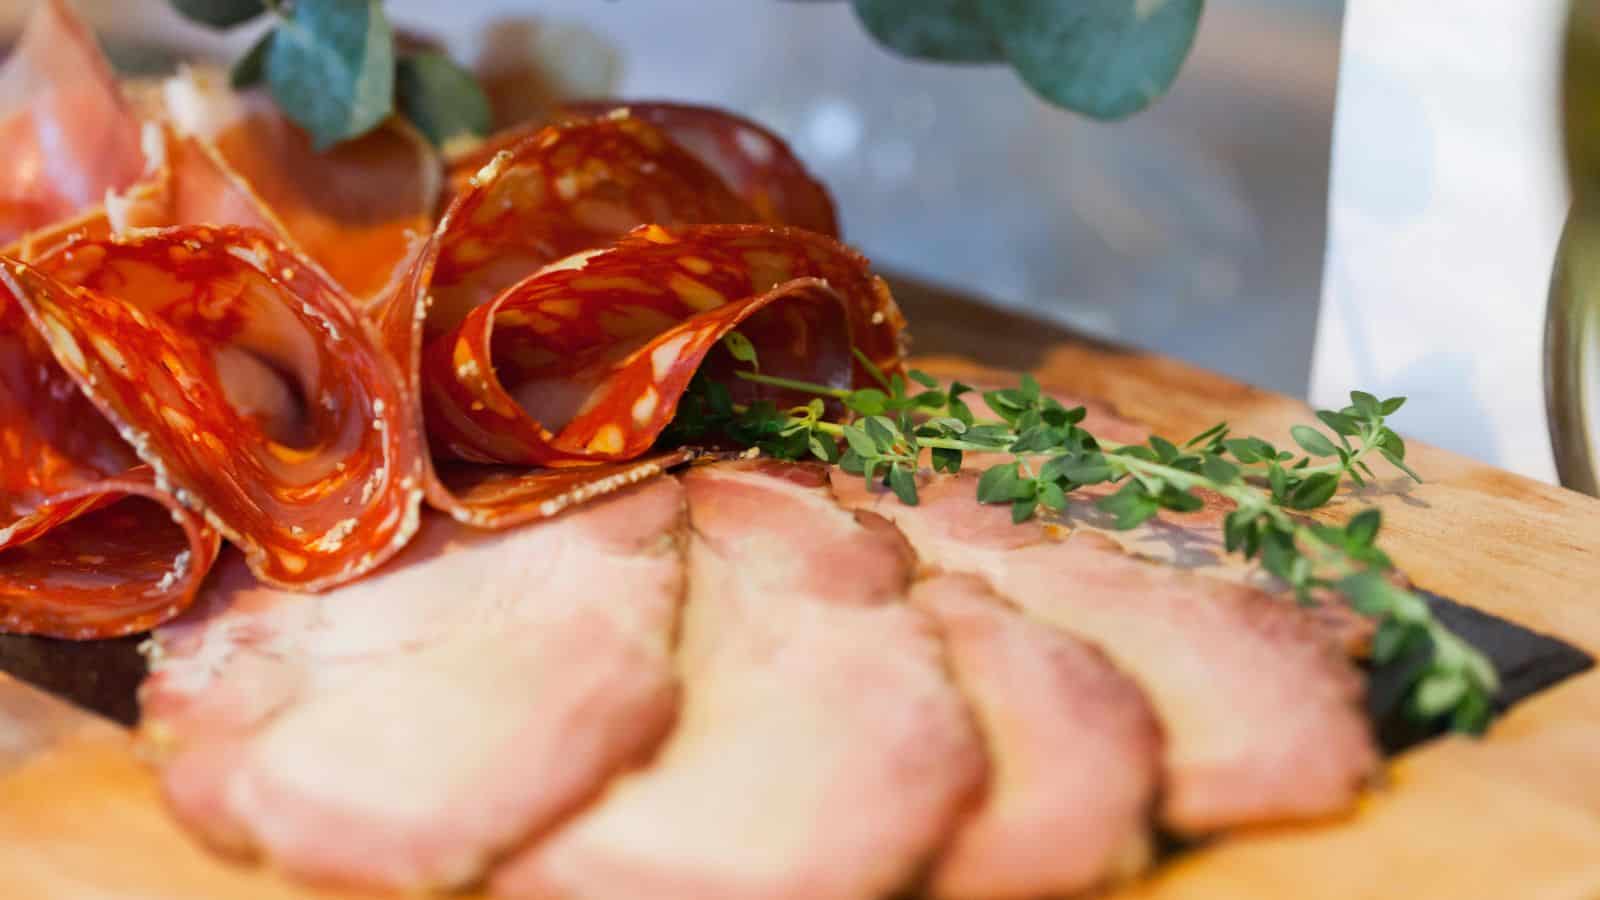 Close-up of ham slices in a wooden board.